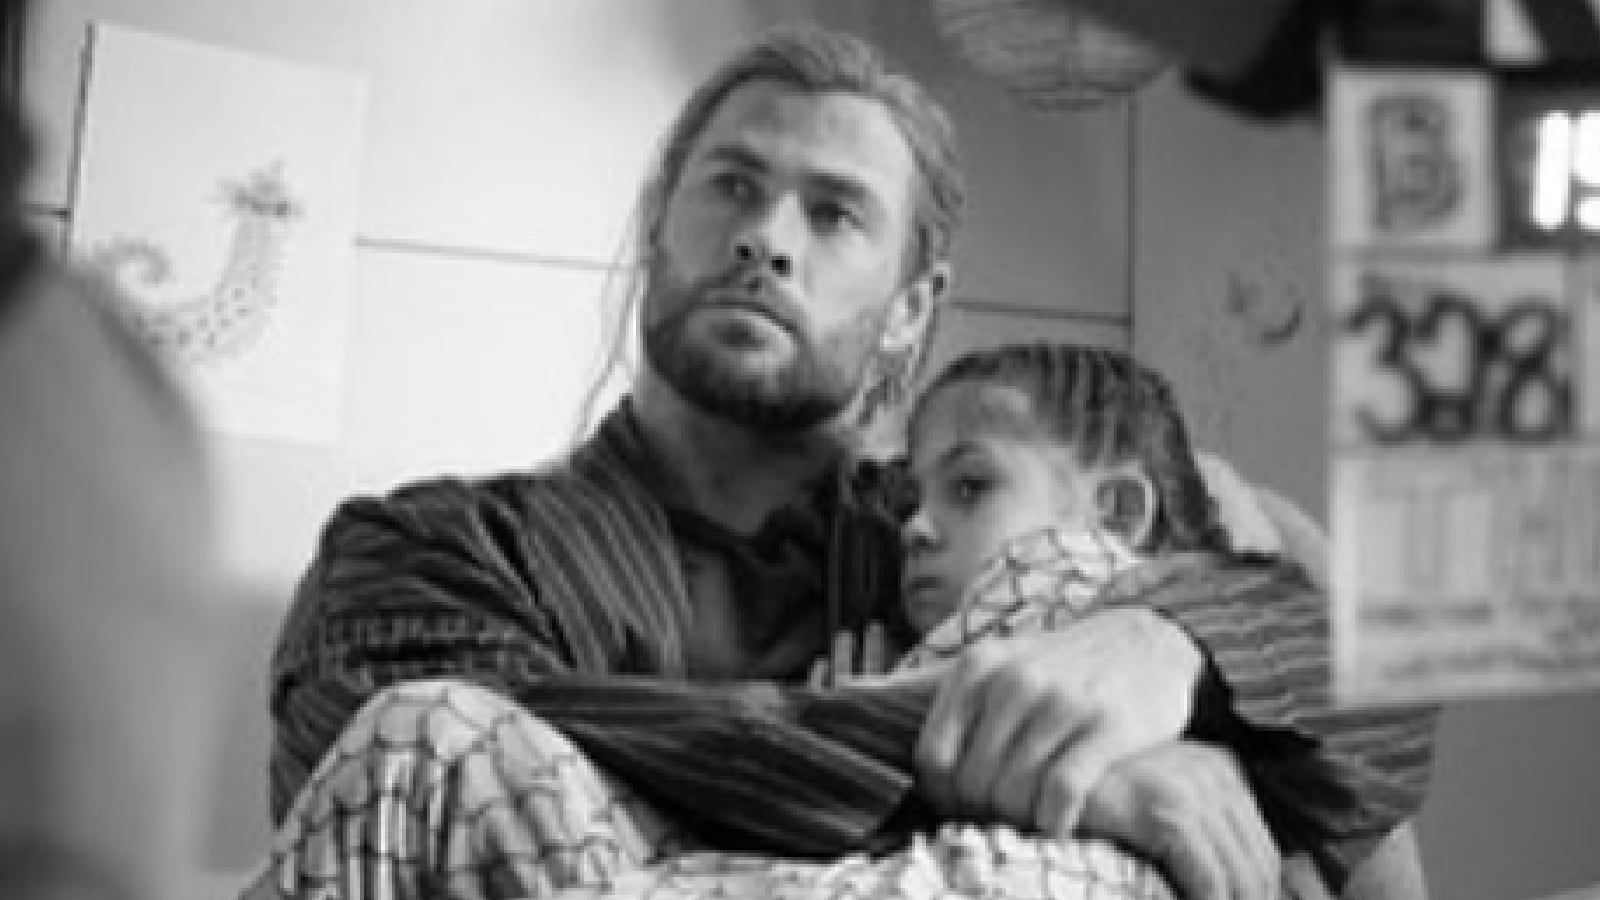 Chris Hemsworth Terms Daughter India Rose His ‘Favourite Superhero’ See Lovable Pic From Thor Sets